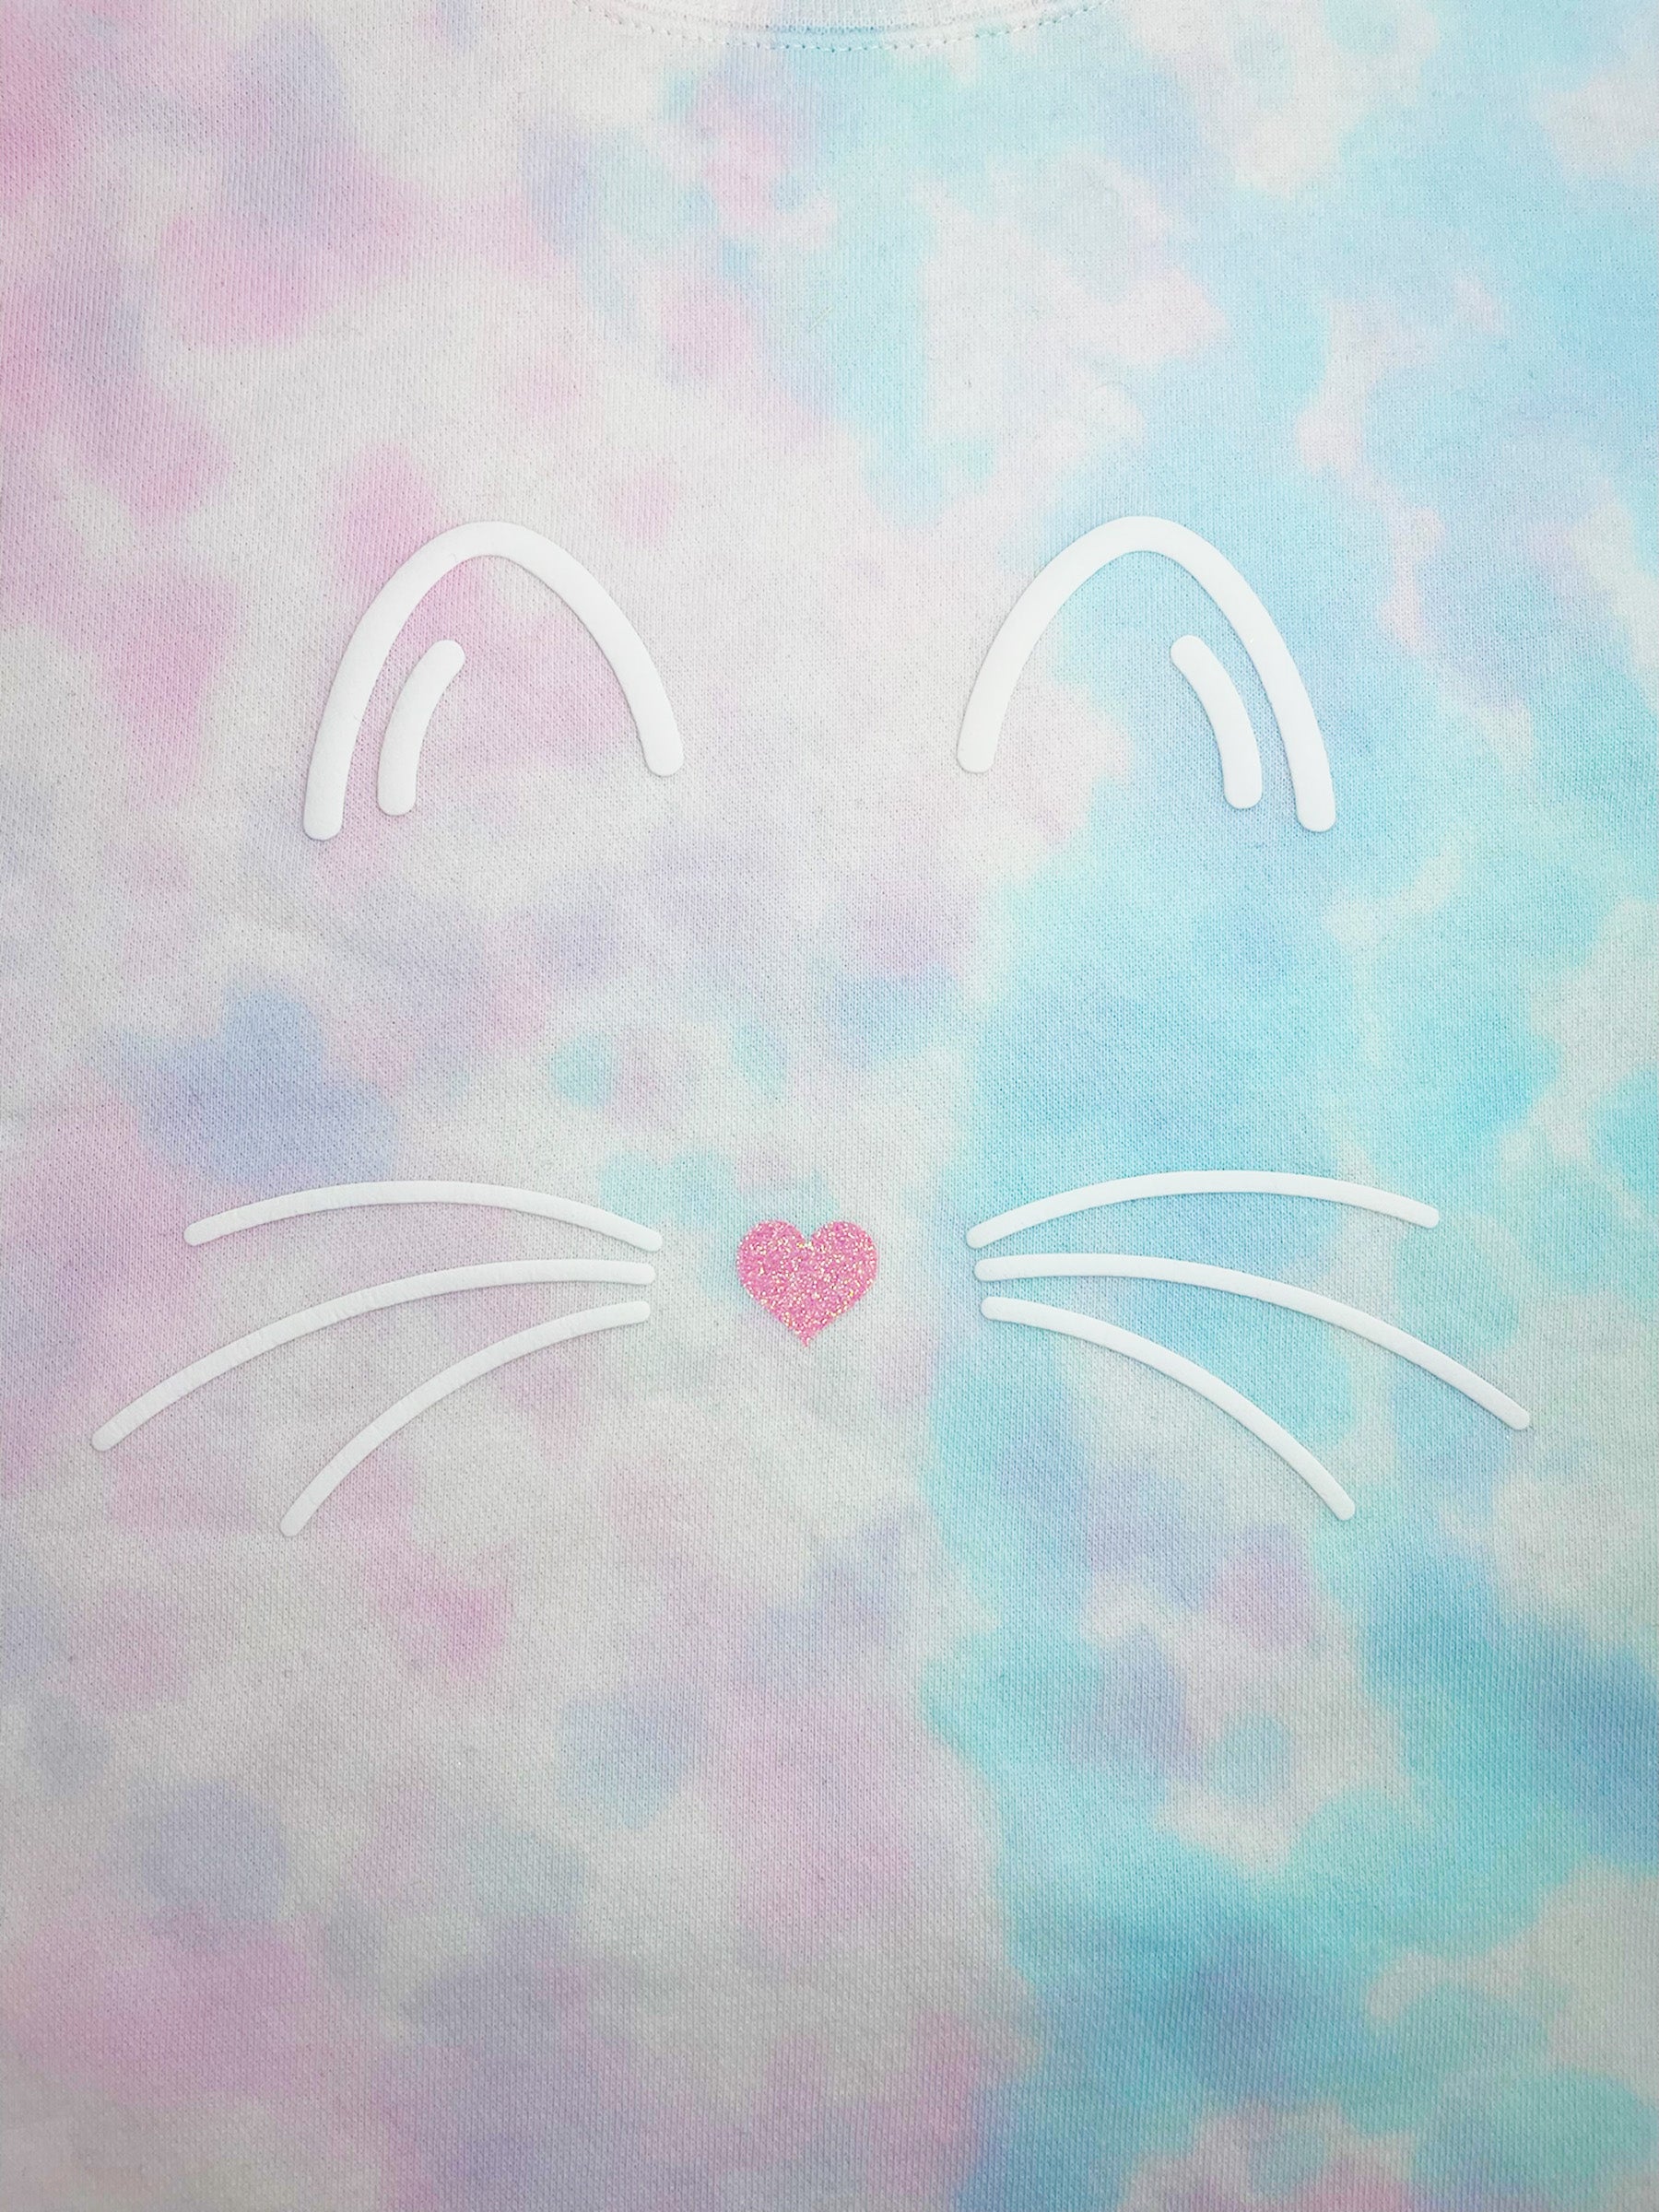 Close up of cat face with white outline of cat ears and wishers with a pink glitter heart nose.